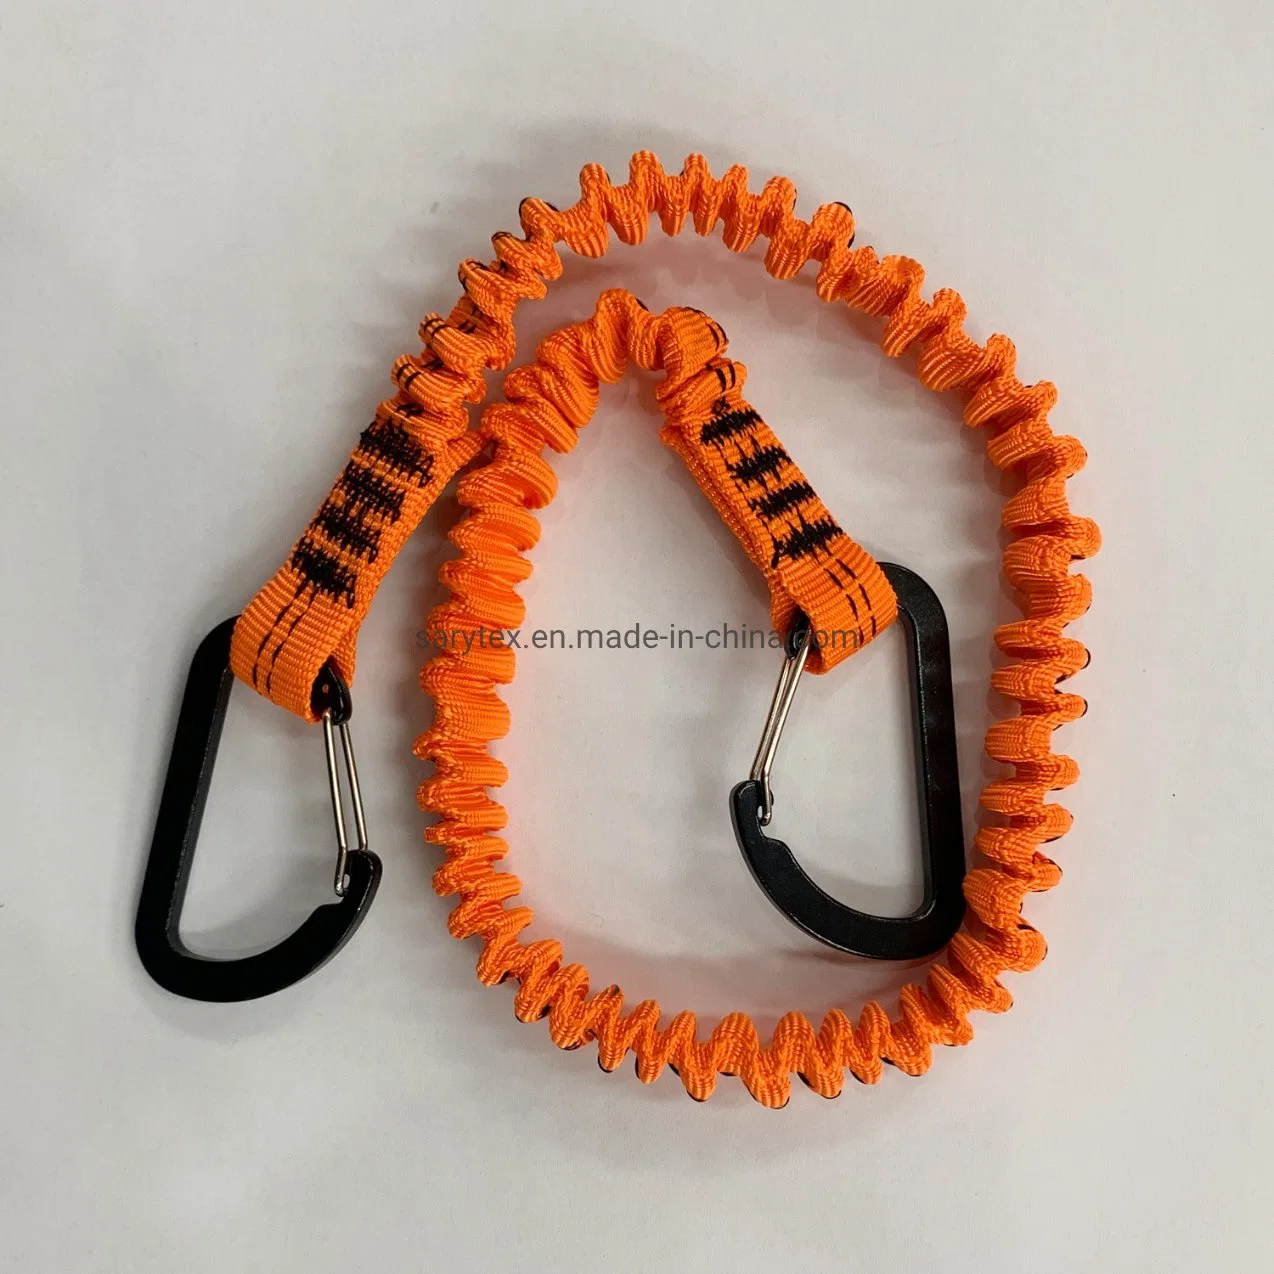 Double Stainless Steel Hook Elastic Anti-Fall Safety Rope